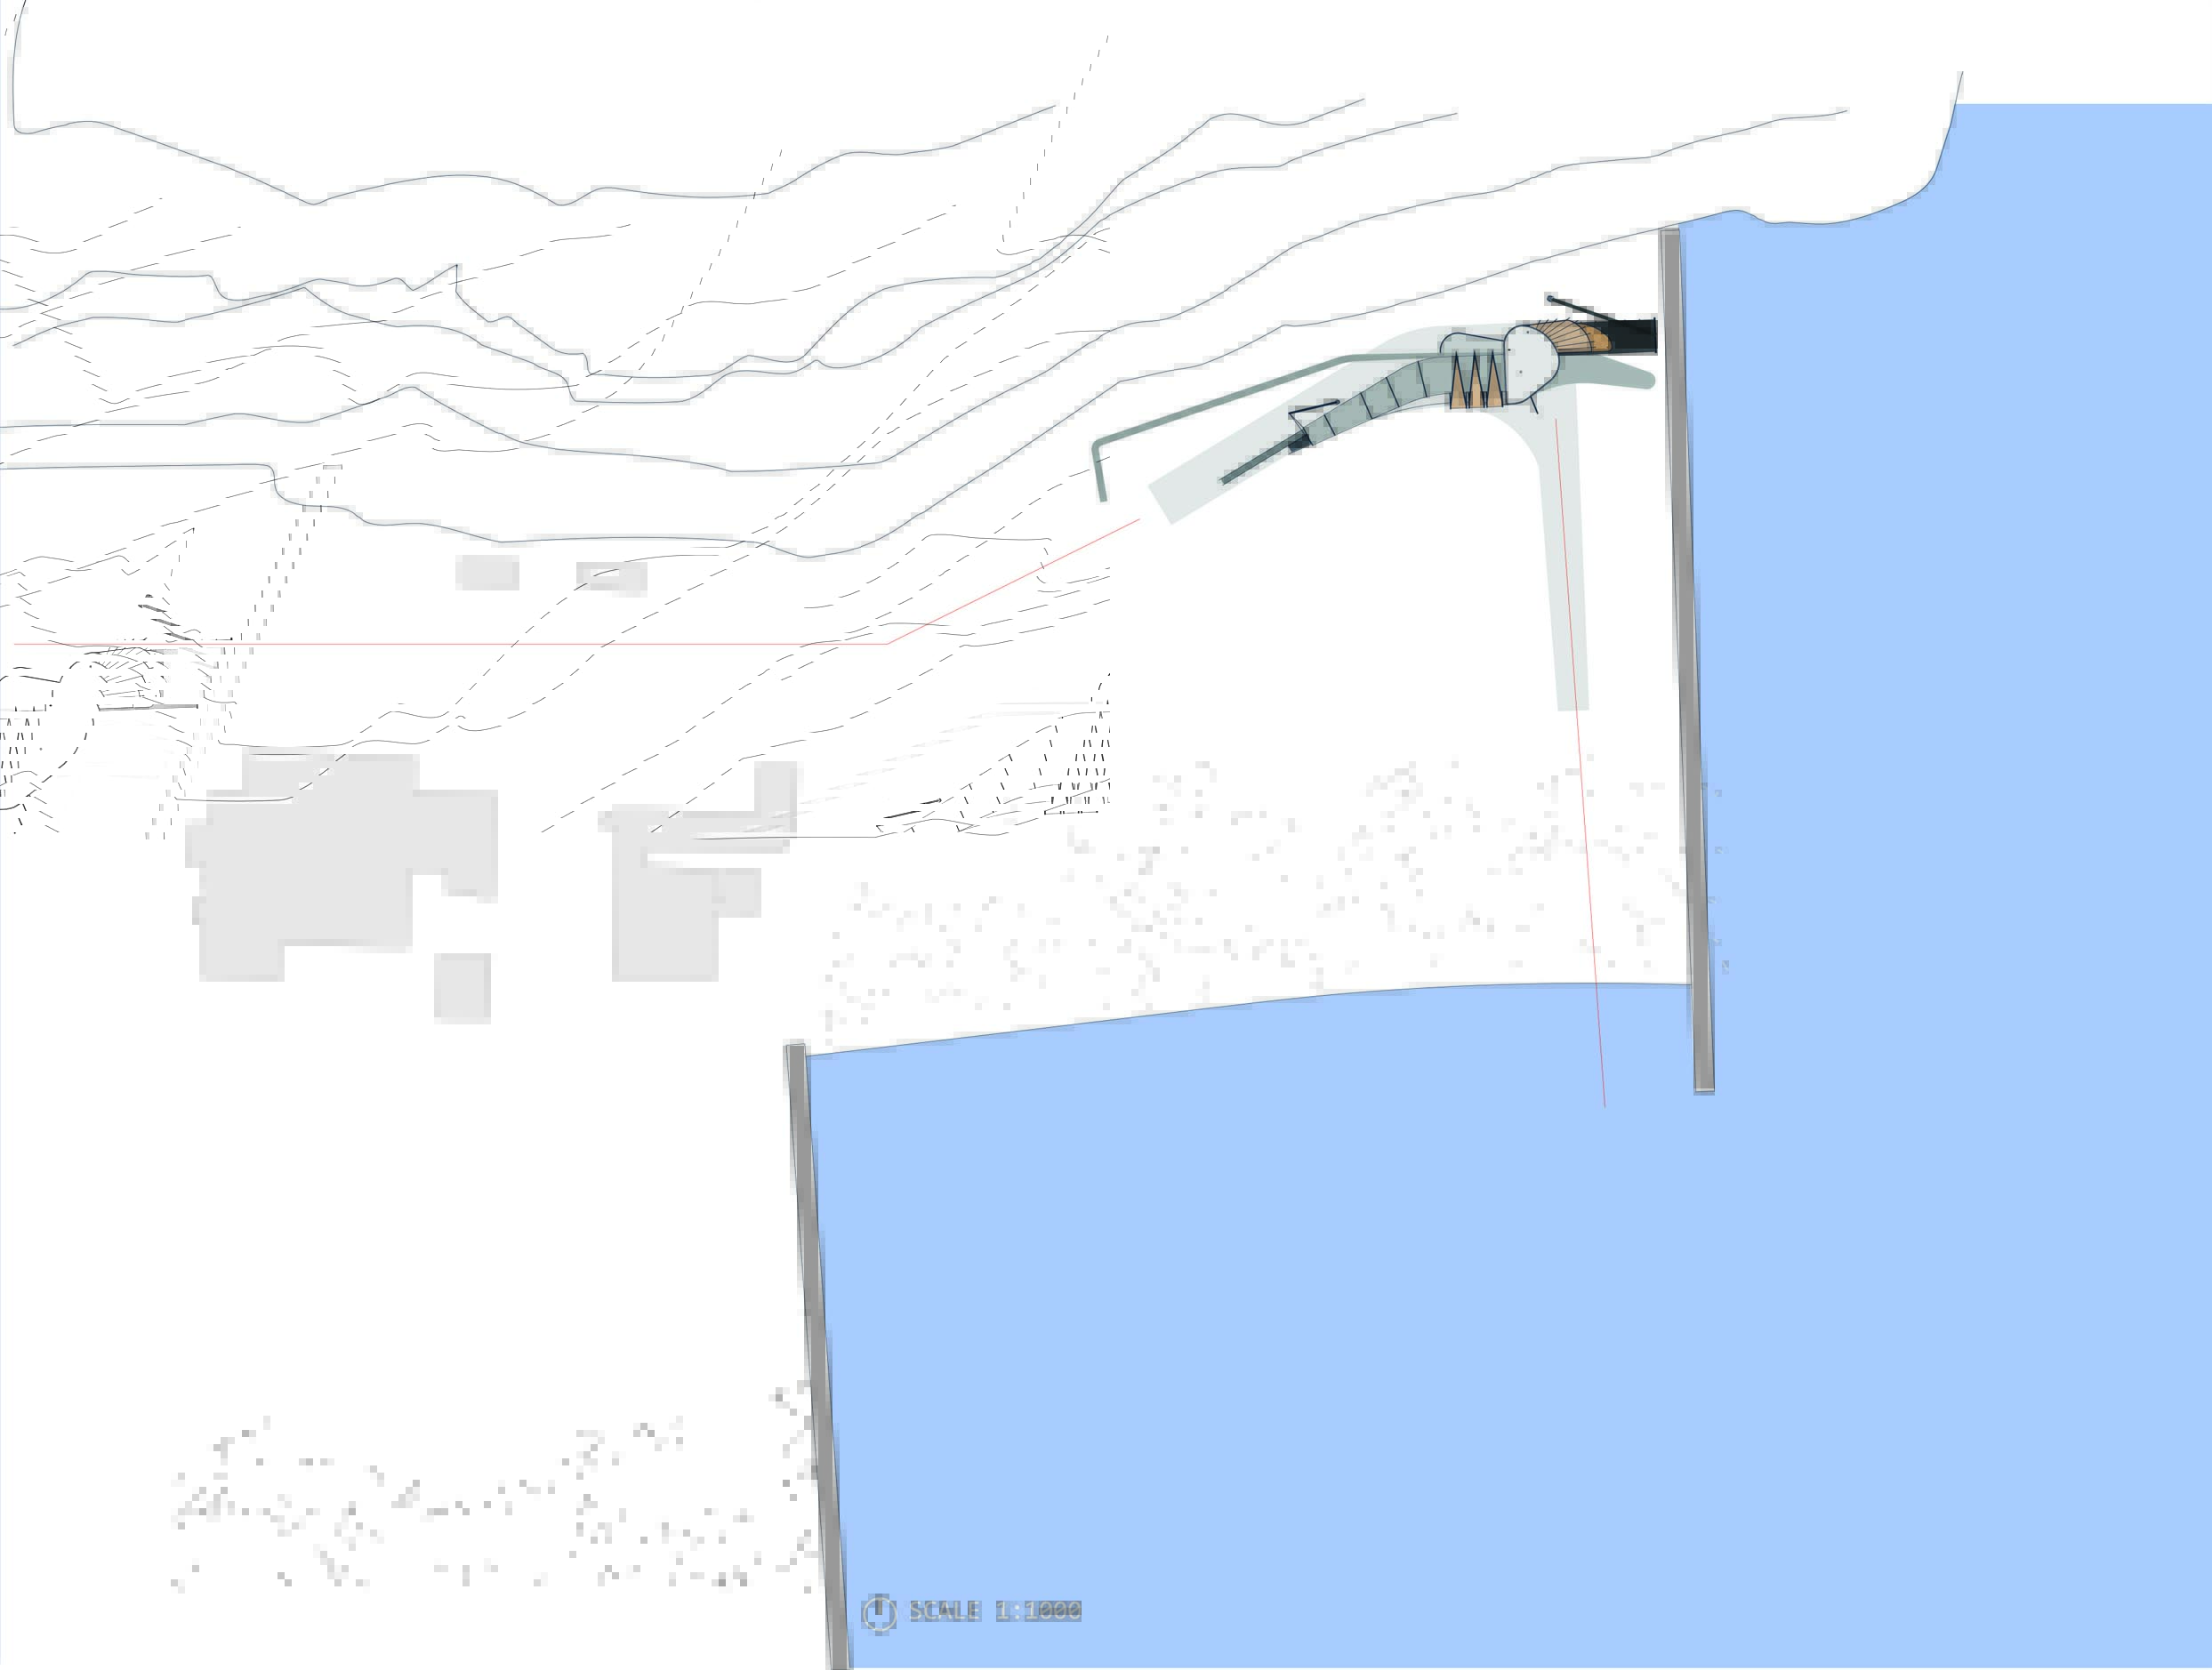 Image of an architectural plan, showing the relationship with the surrounding roads along with sea access and views.